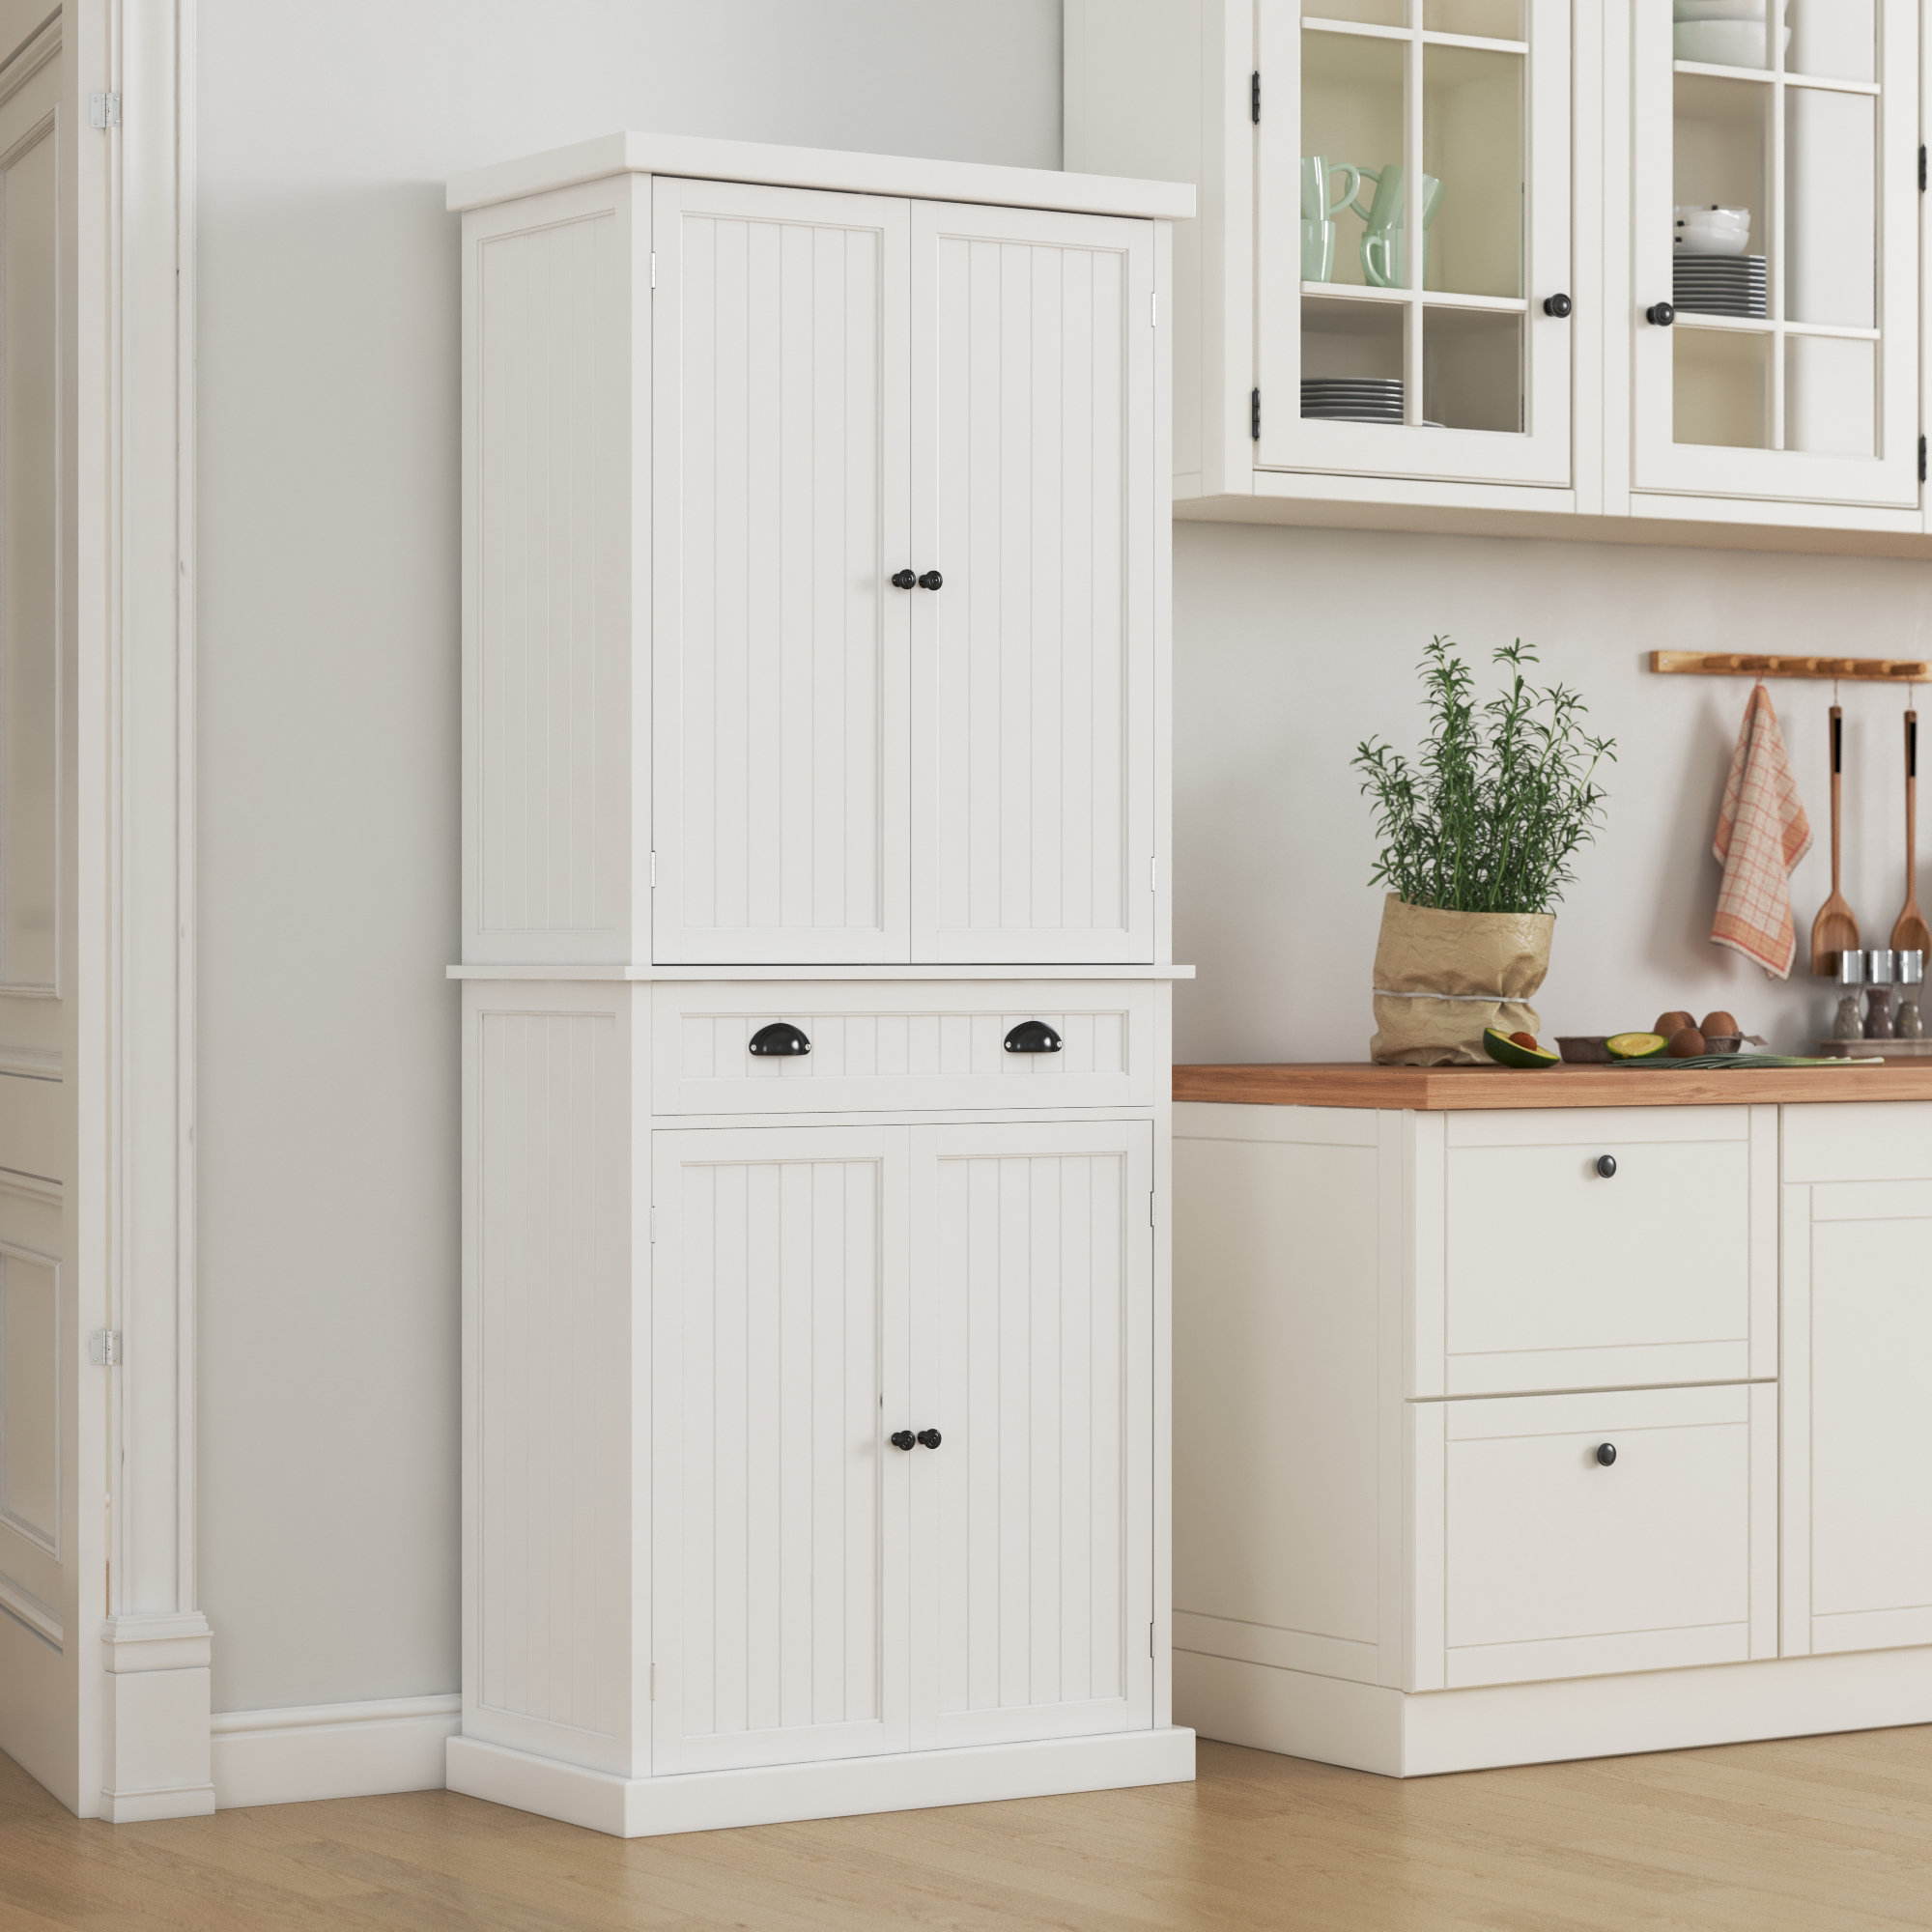 Best Selling Pantry Cabinets 